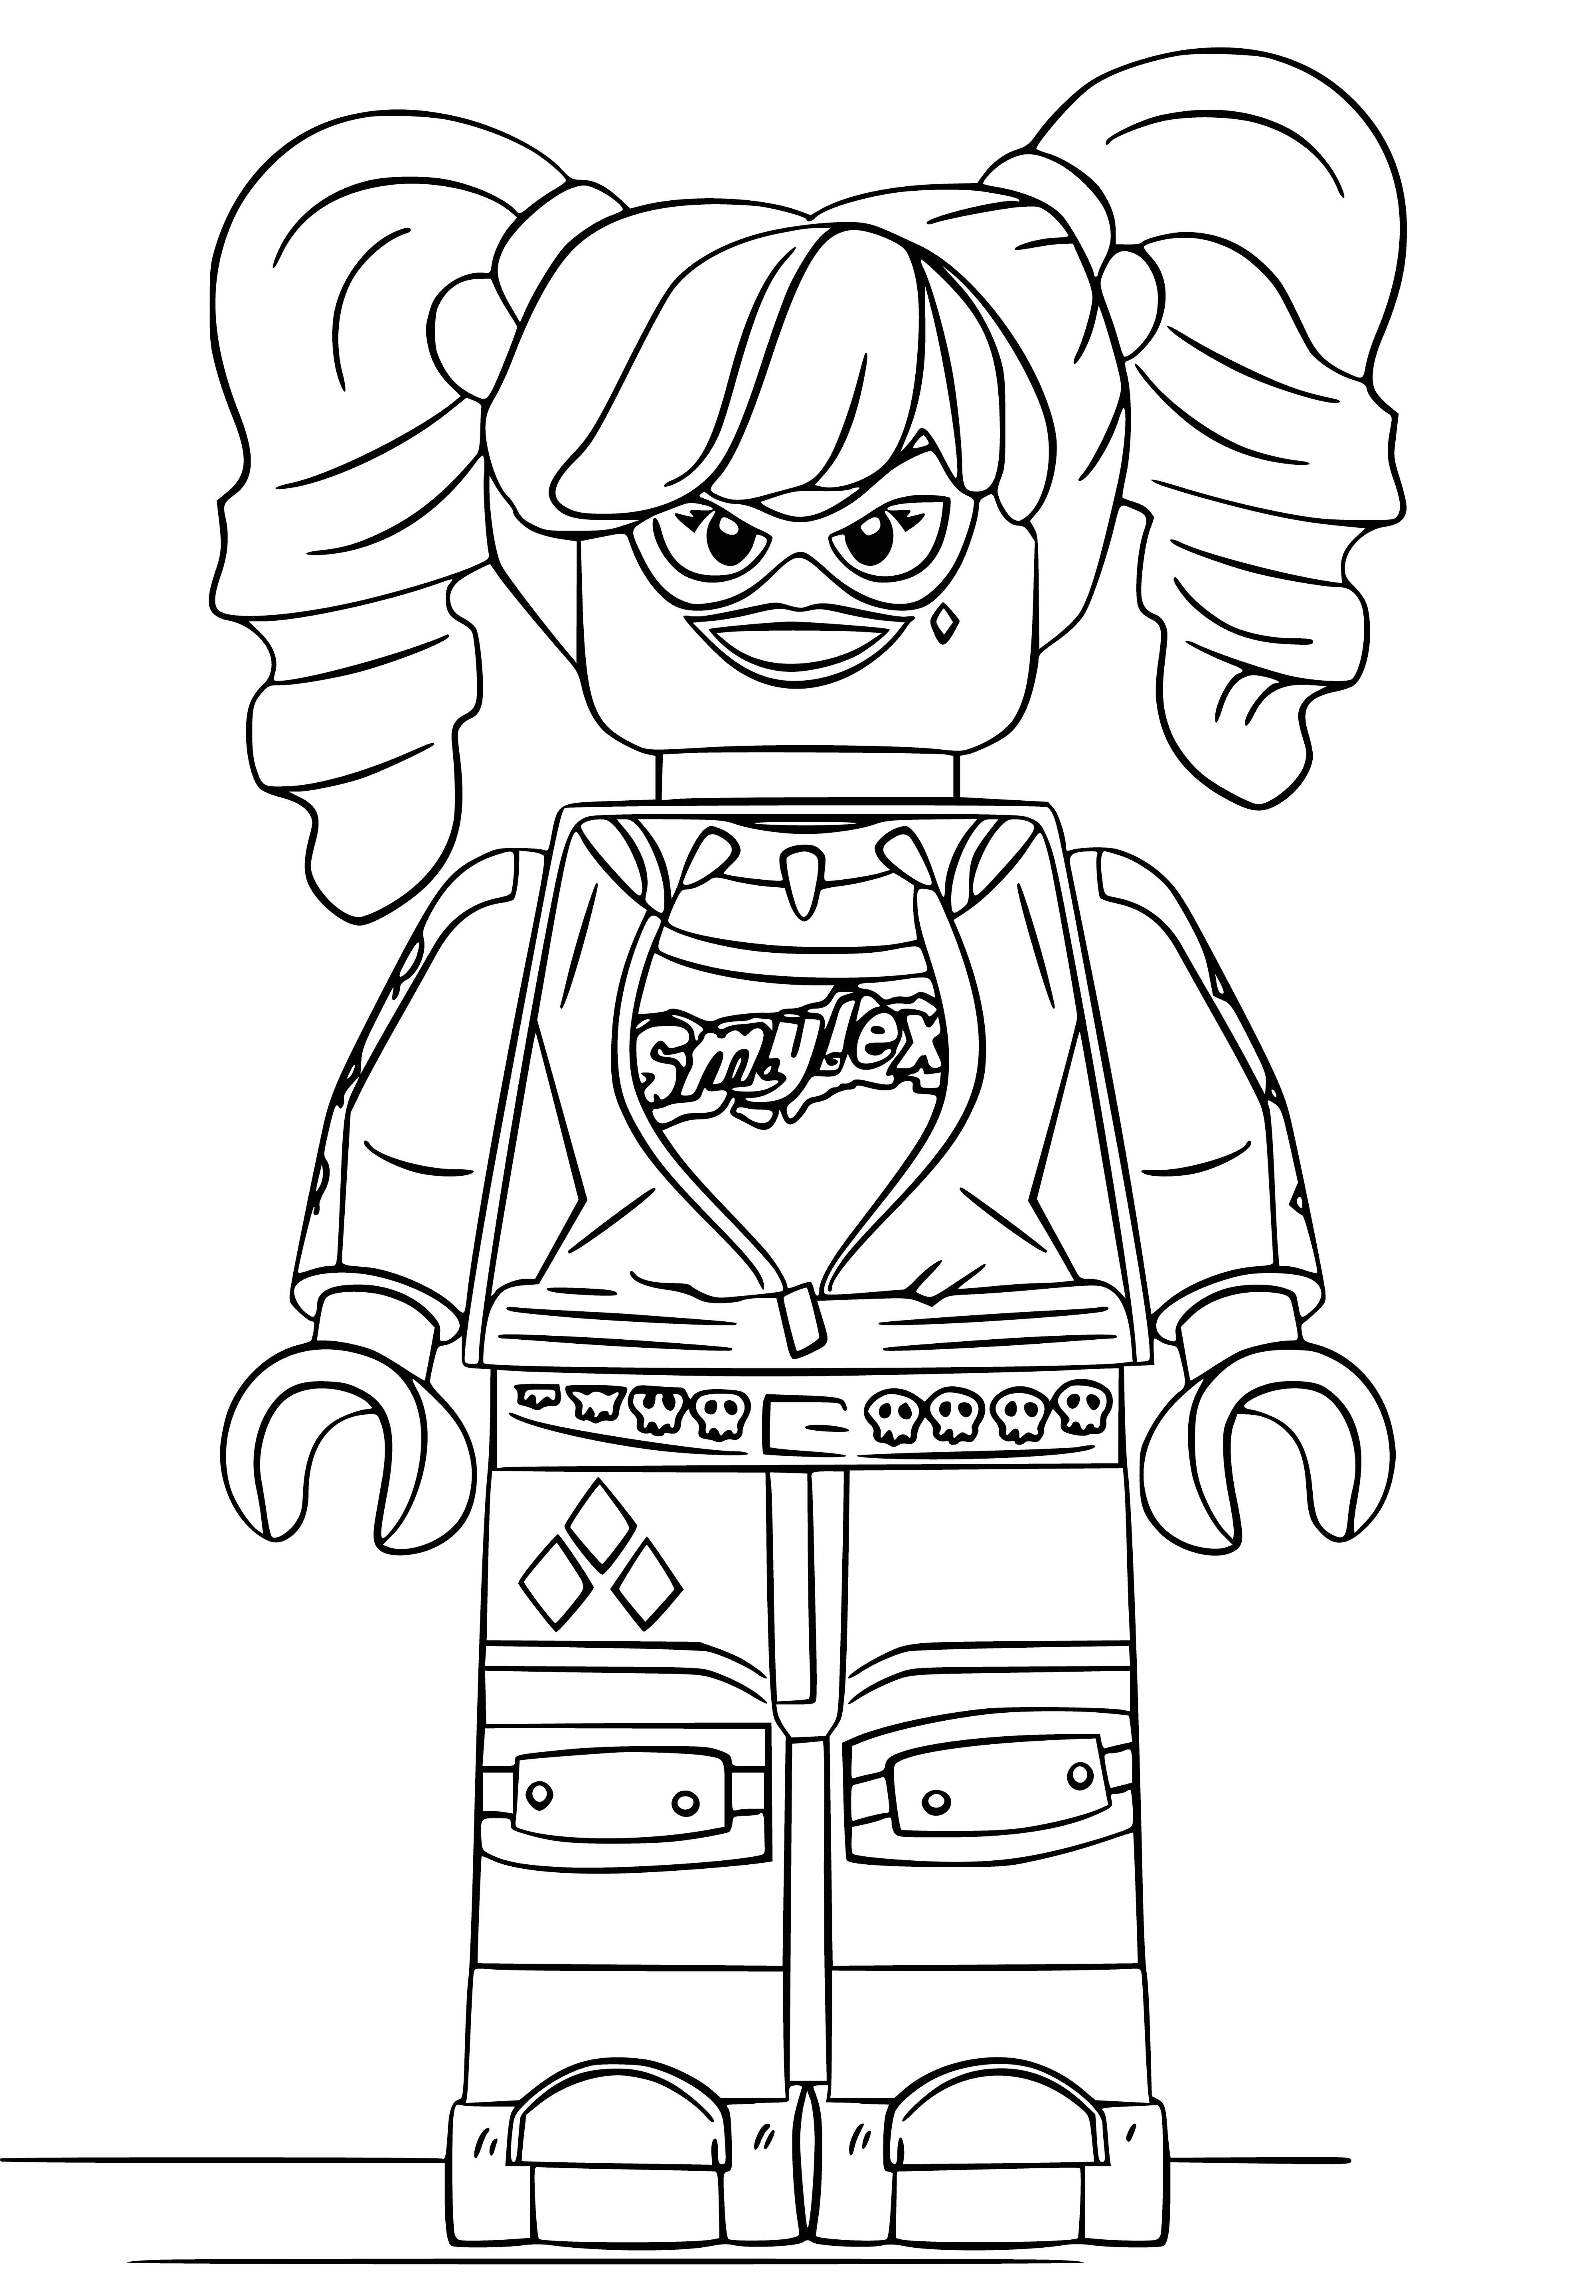 Harley Quinn coloring page